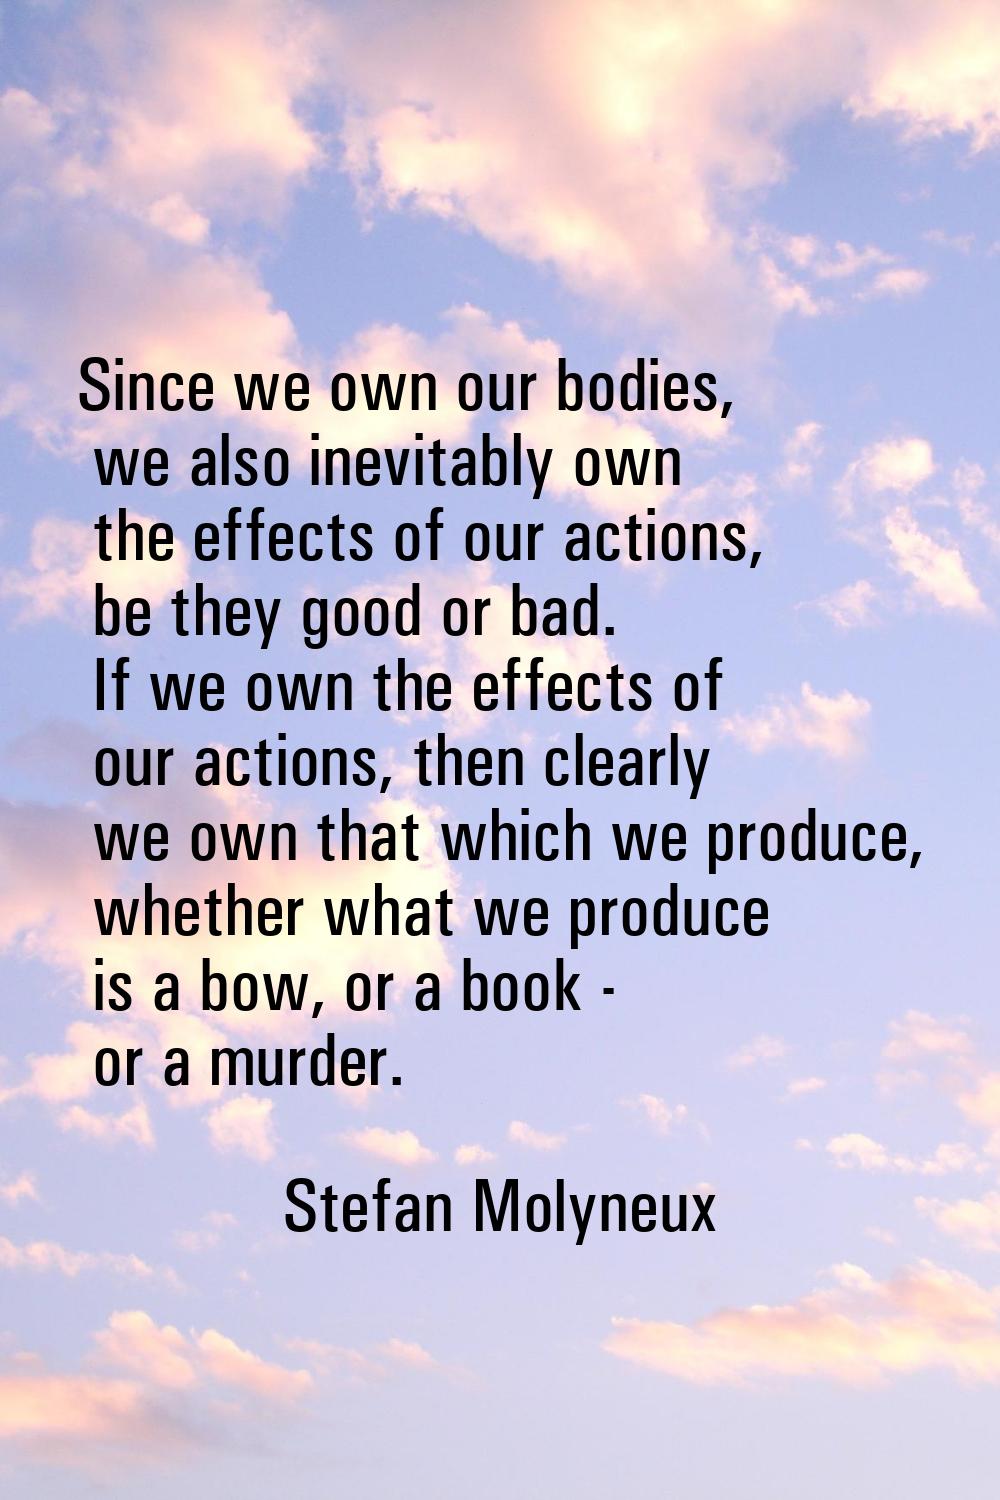 Since we own our bodies, we also inevitably own the effects of our actions, be they good or bad. If